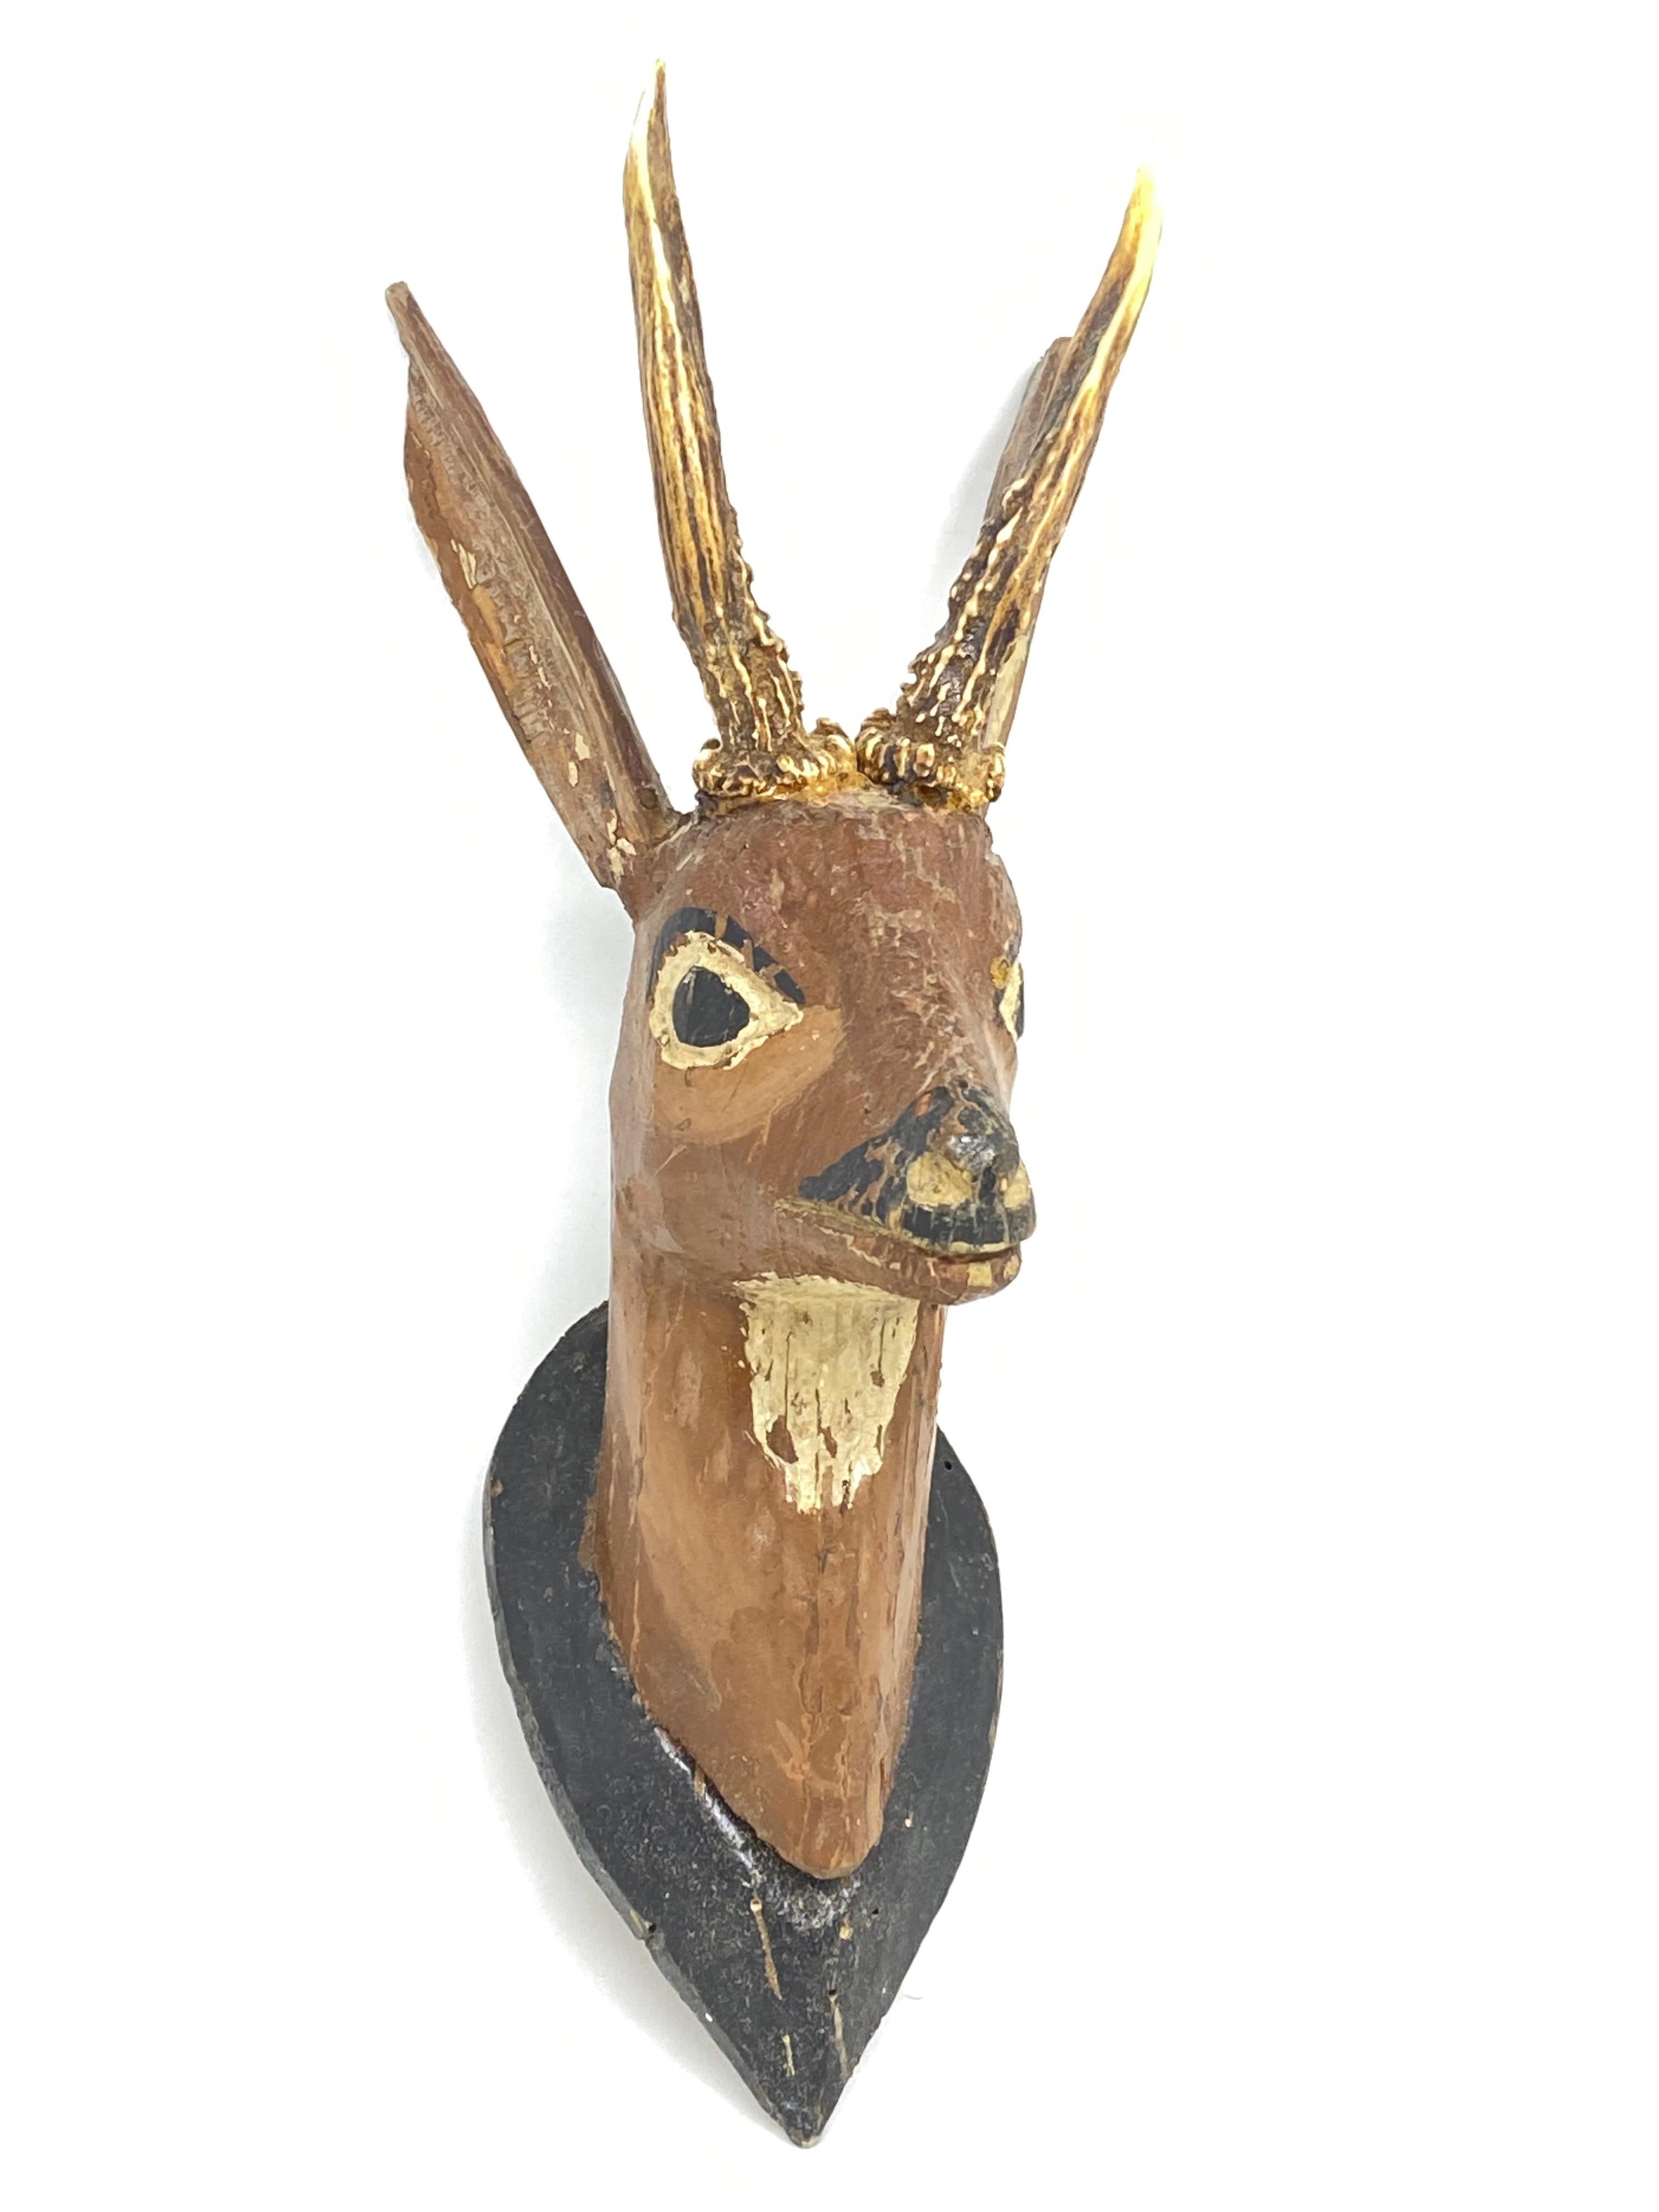 A great looking hand carved original wooden Folk Art deer head wall decoration. A great piece for a suitable ambiance in a trophy room or the office of a Hunter or Woodsman. More than likely one of the Folk Art items made between 1880 and the late